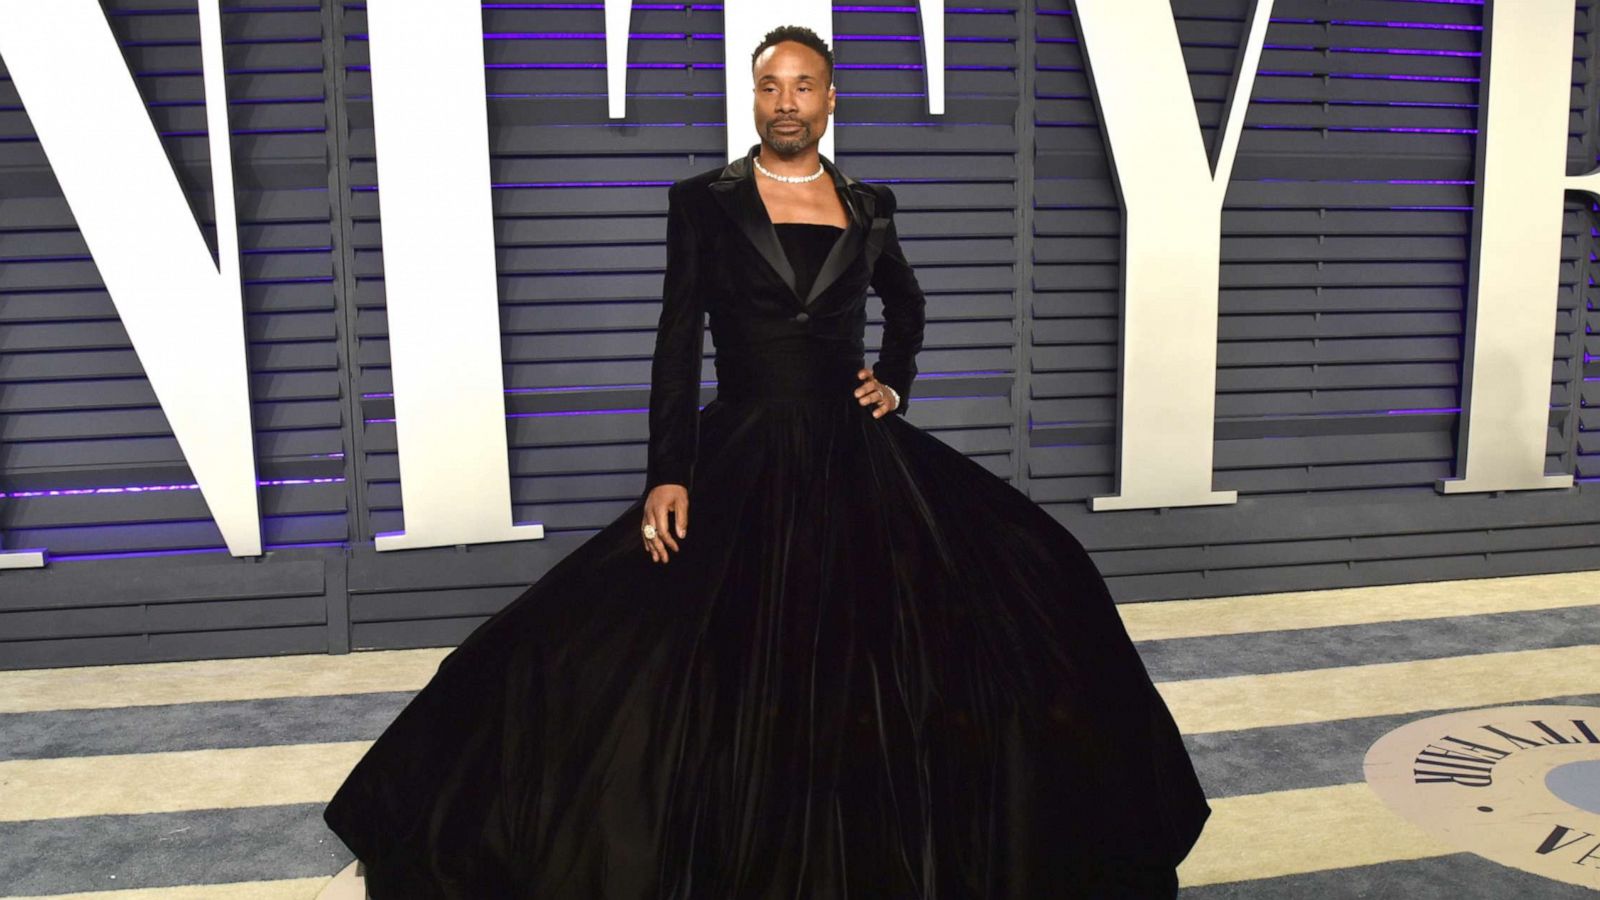 Billy Porter on being called a fashion icon: 'It's very humbling